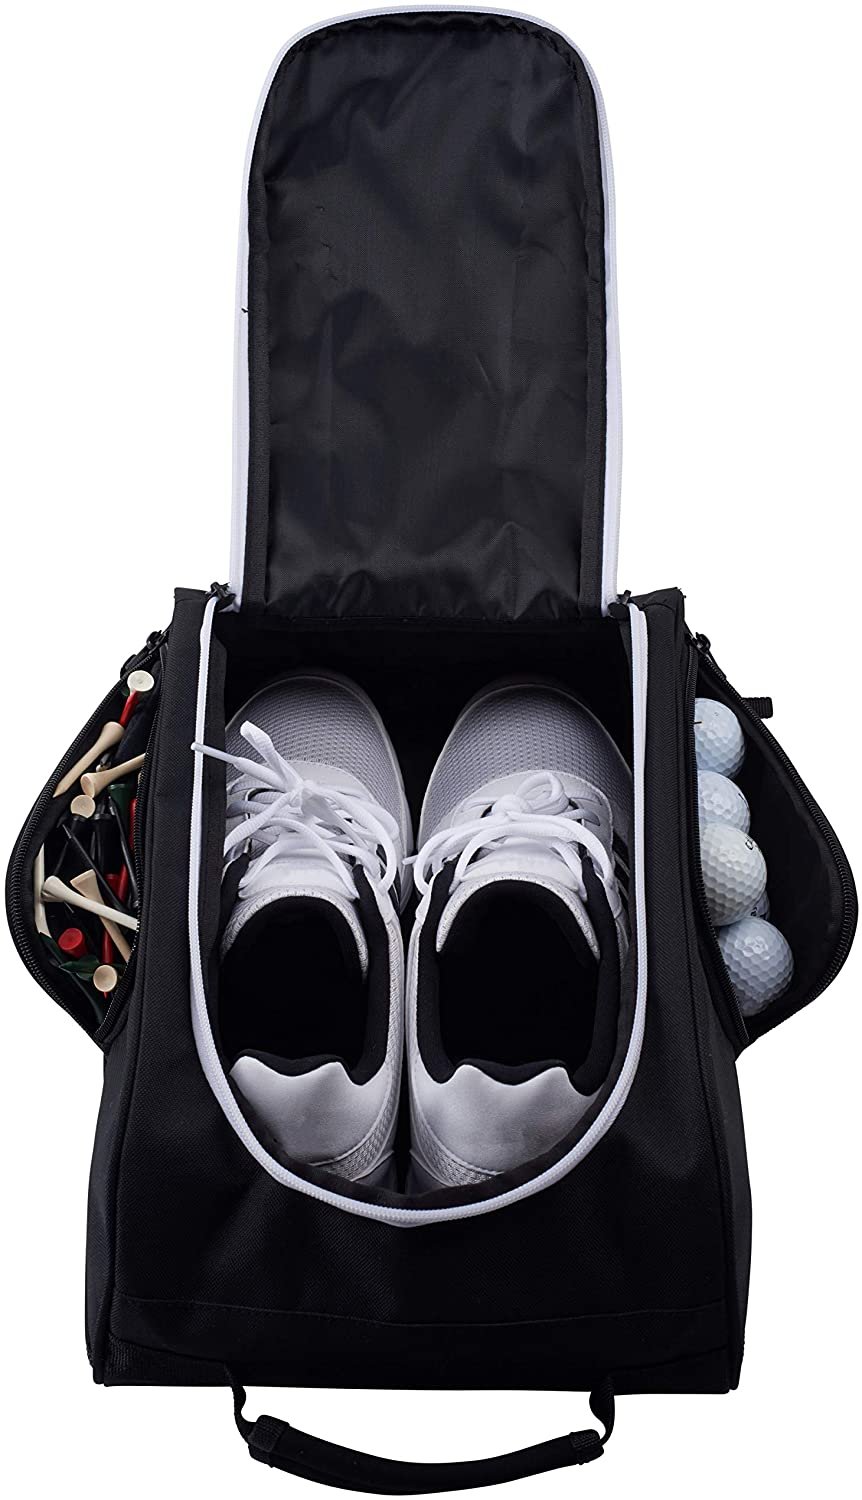 Athletico Golf Shoe Bag - Zippered Shoe Carrier Bags With Ventilation & Outside Pocket for Socks, Tees, etc. (Gray)